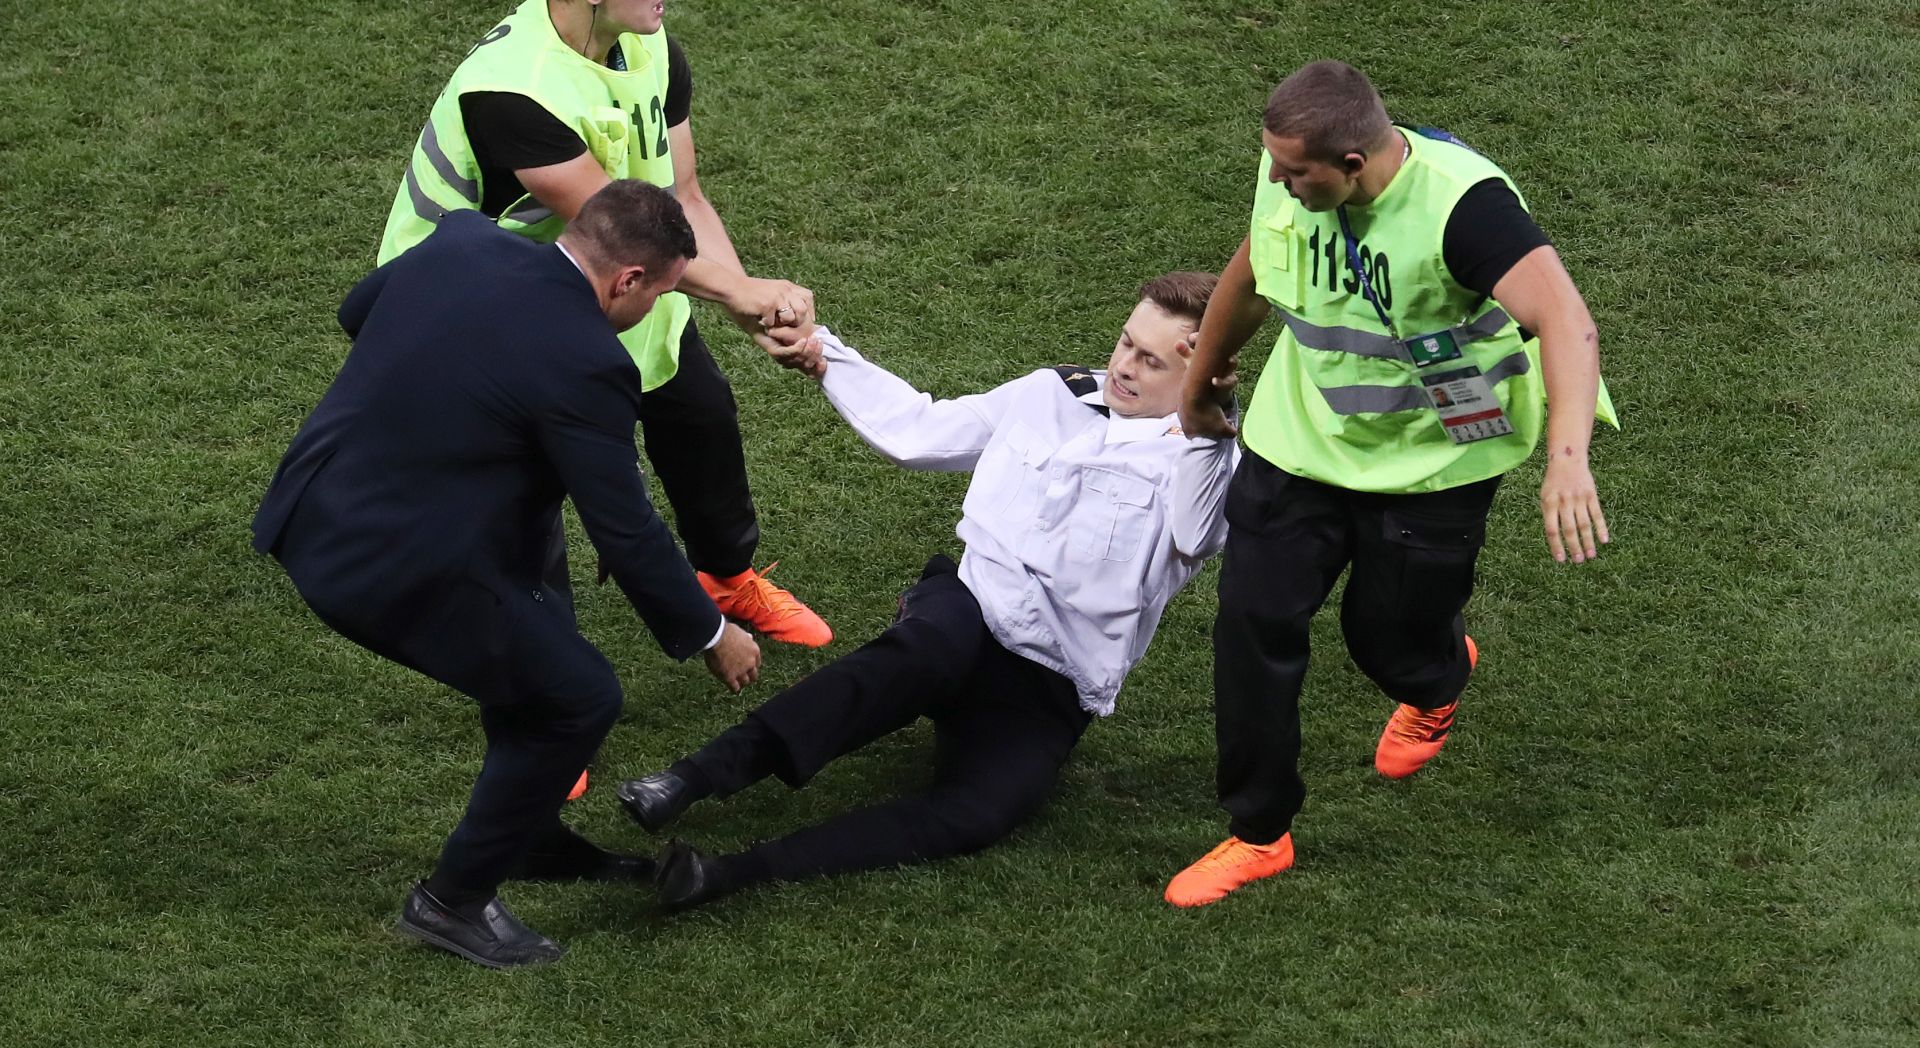 epa07016928 (FILE) - A pitch invader Pyotr Verzilov (C) of Pussy Riot is removed from the pitch during the FIFA World Cup 2018 final between France and Croatia in Moscow, Russia, 15 July 2018  (reissued on 13 September 2018). According to media reports on 13 September 2018, Pyotr Verzilov fell ill after attending a court hearing for Veronika Nikulshina, a fellow Pussy Riot member, he has been hospitalised late on September 11 in Moscow, where he remains in a critical condition. Verzilov is currently receiving treatment at the toxicology wing of Moscow's Bakhrushin City Clinical Hospital.  EPA/ABEDIN TAHERKENAREH   EDITORIAL USE ONLY  EDITORIAL USE ONLY *** Local Caption *** 54494130